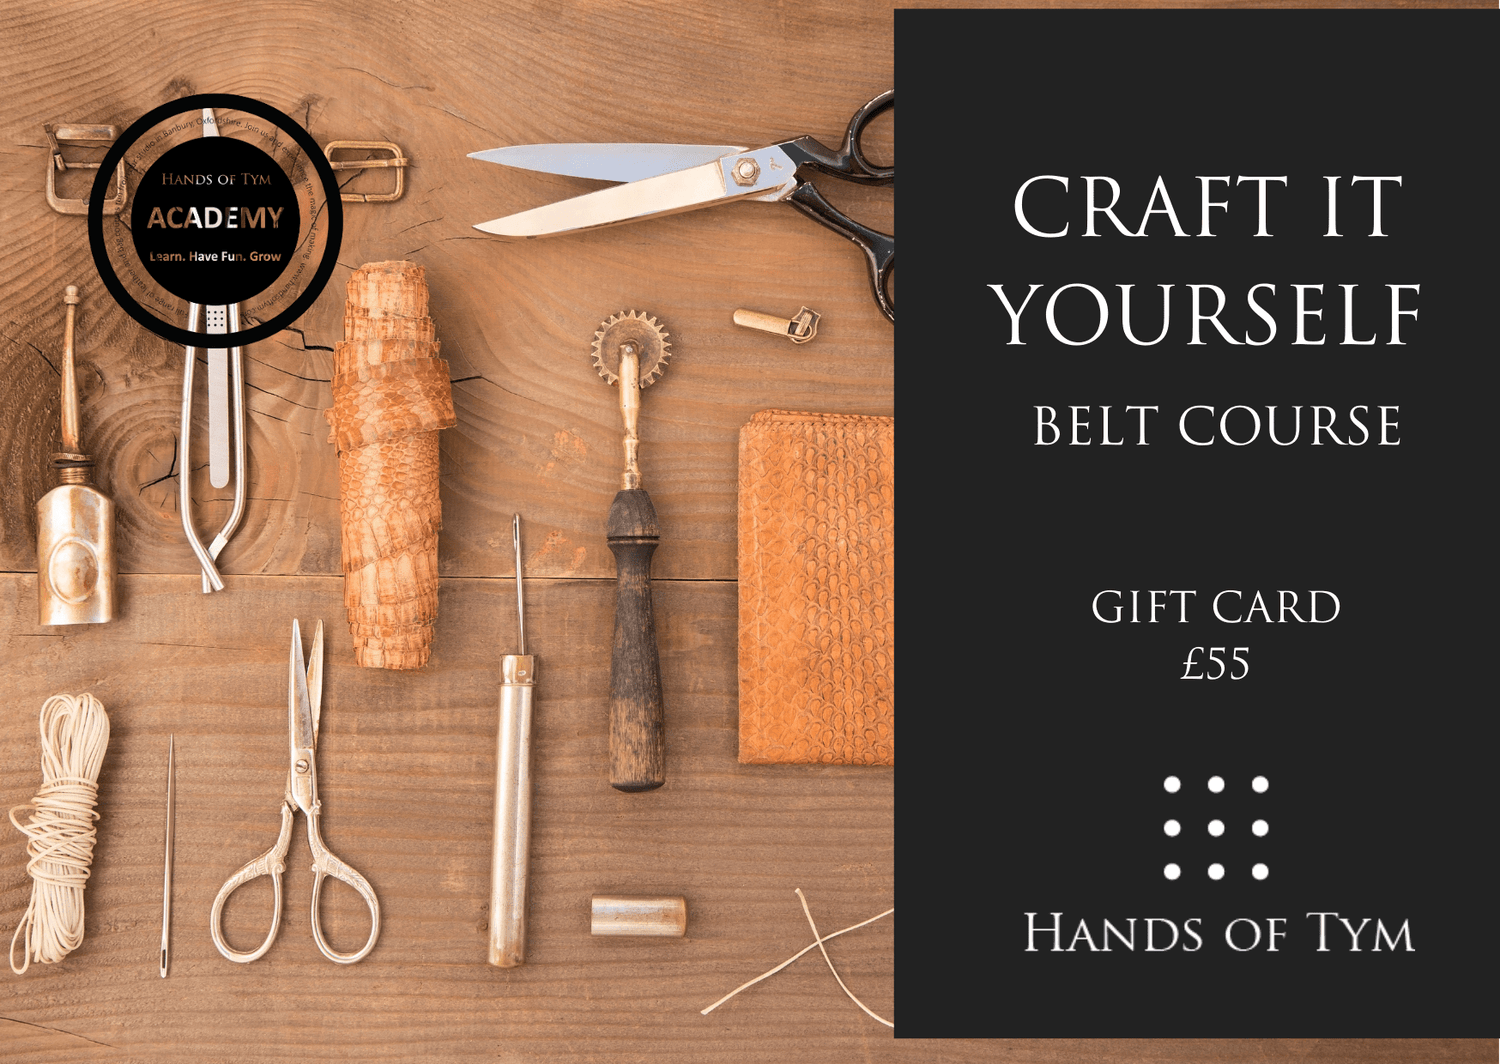 Hands of Tym Gift Card Craft it Yourself - Belt Course - £55 Hands of Tym Gift Cards